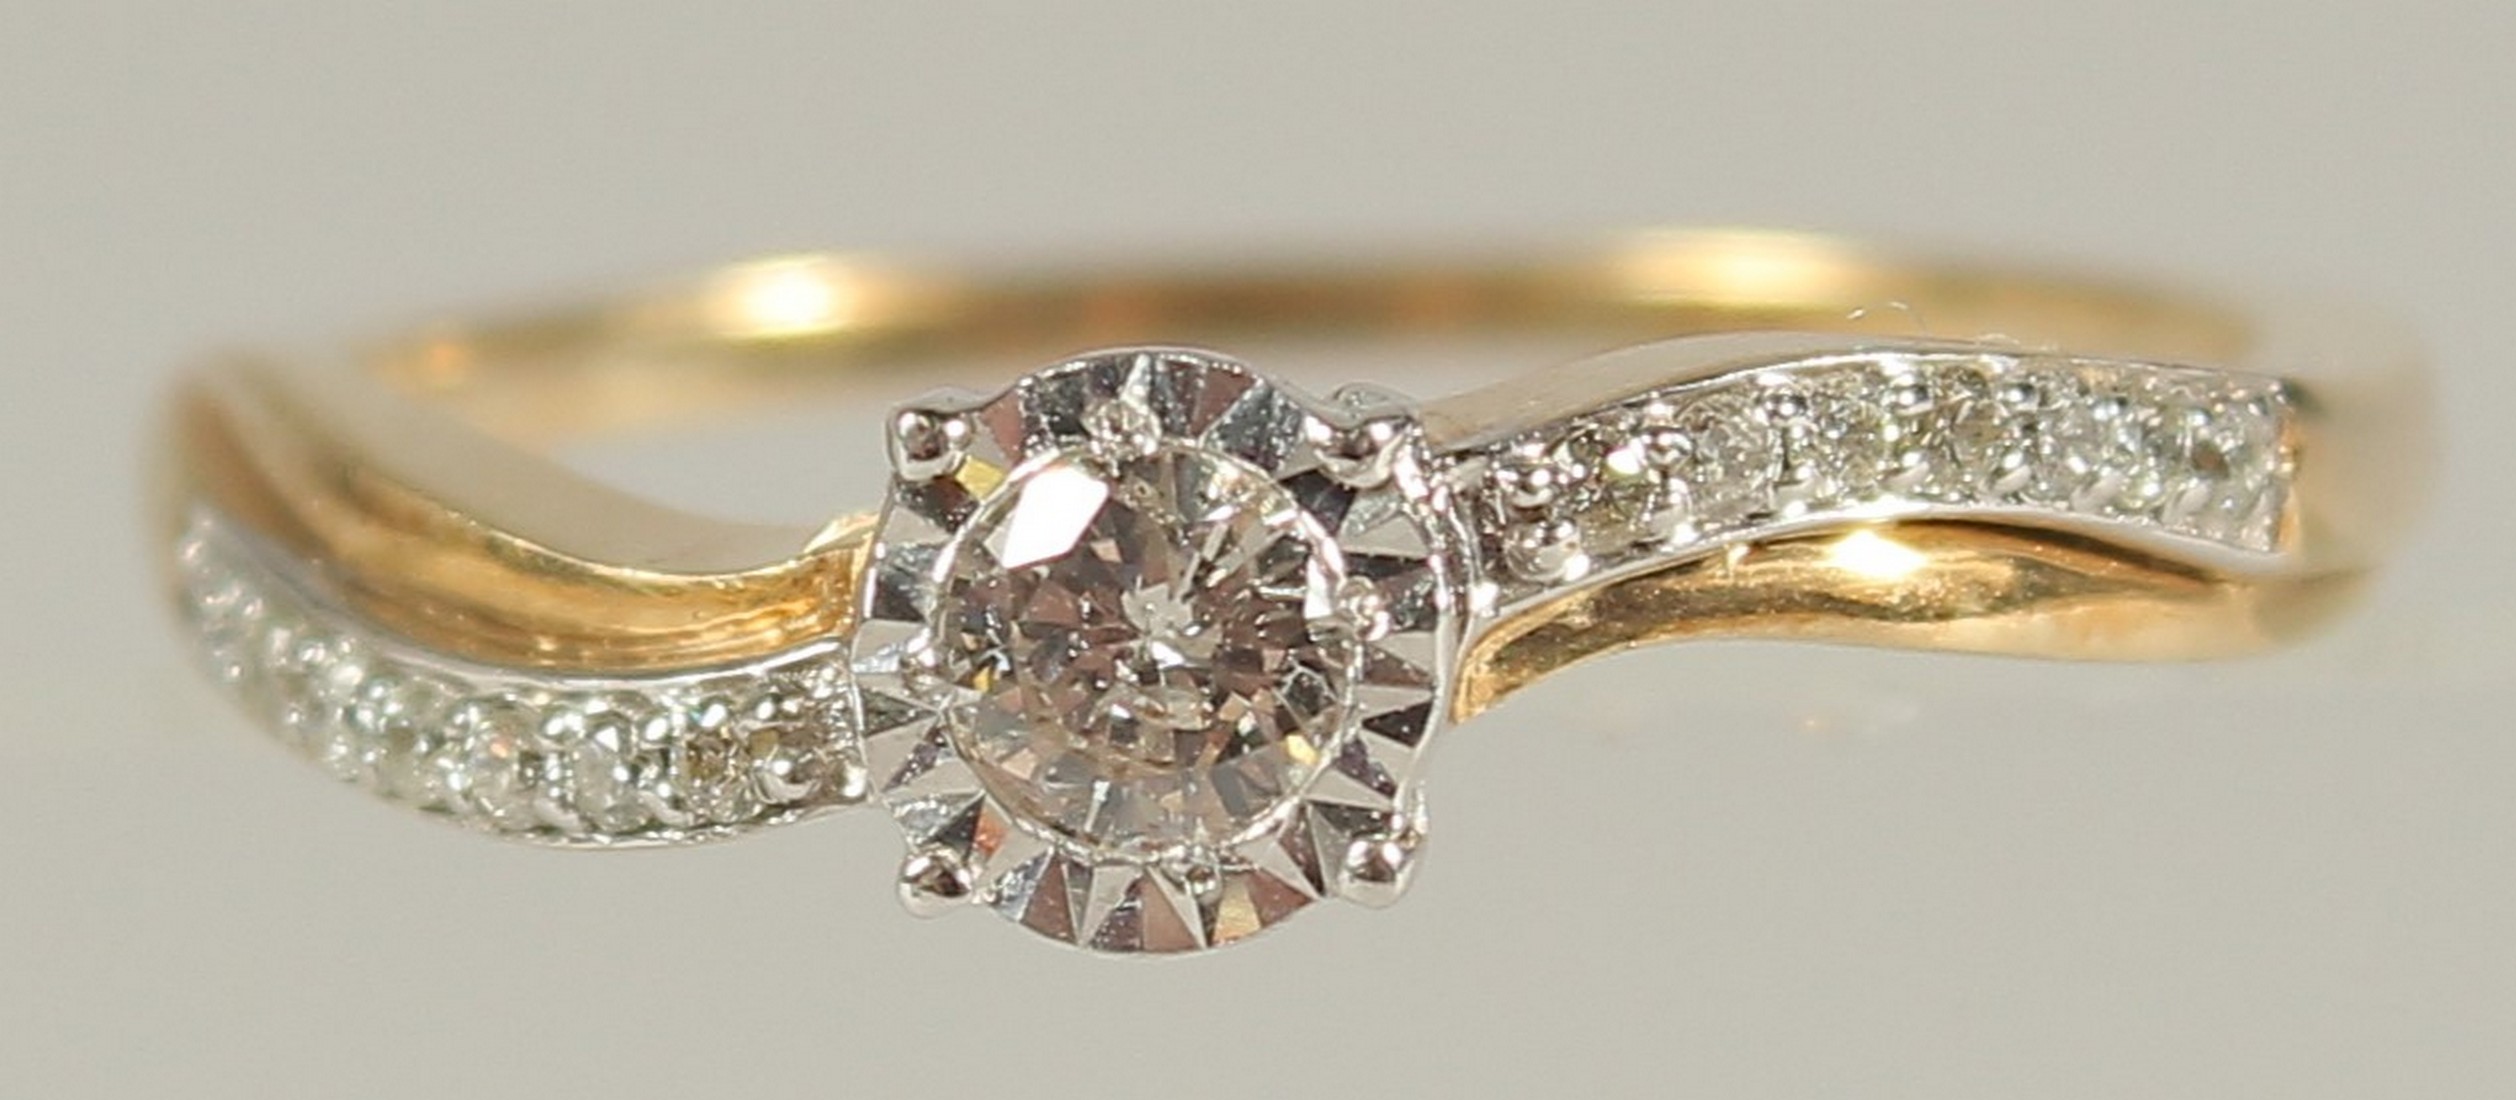 A 9CT YELLOW GOLD SOLITAIRE-STYLE RING SET WITH 0.22 RBC DIAMONDS IN TOTAL, in a twist-style